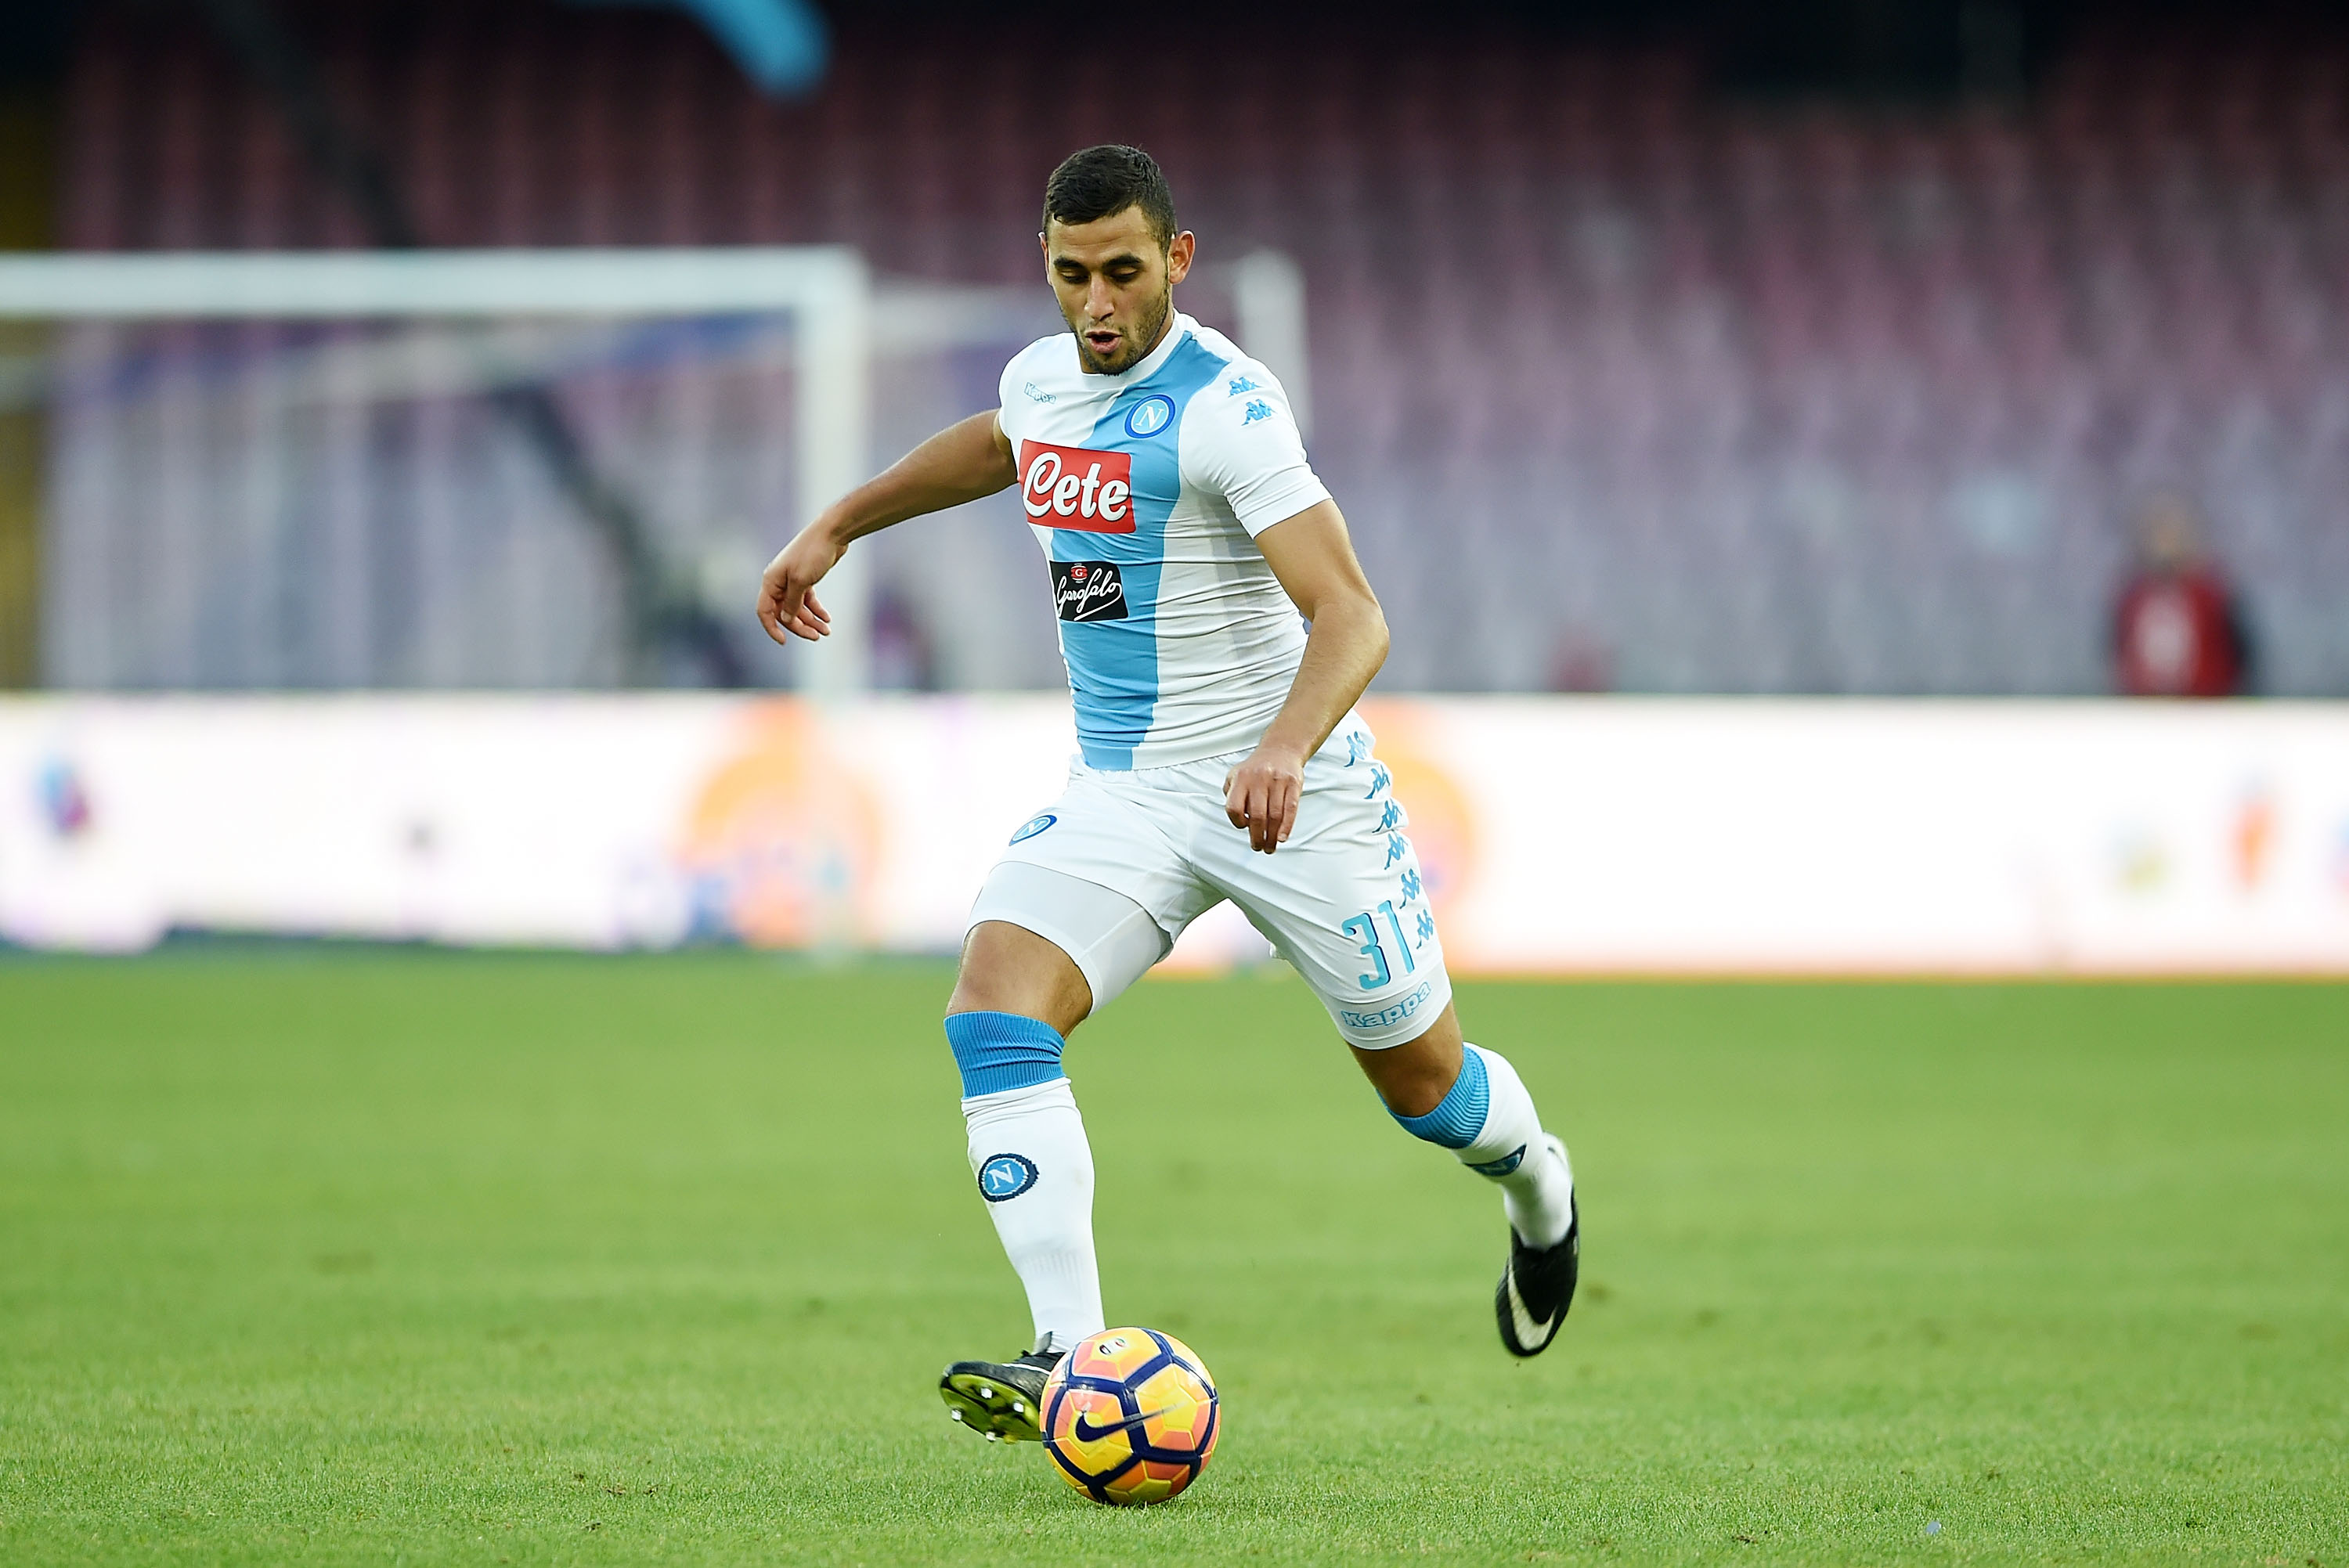 NAPLES, ITALY - DECEMBER 18:  Faouzi Ghoulam of SSC Napoli in action during the Serie A match between SSC Napoli and FC Torino at Stadio San Paolo on December 18, 2016 in Naples, Italy.  (Photo by Francesco Pecoraro/Getty Images)